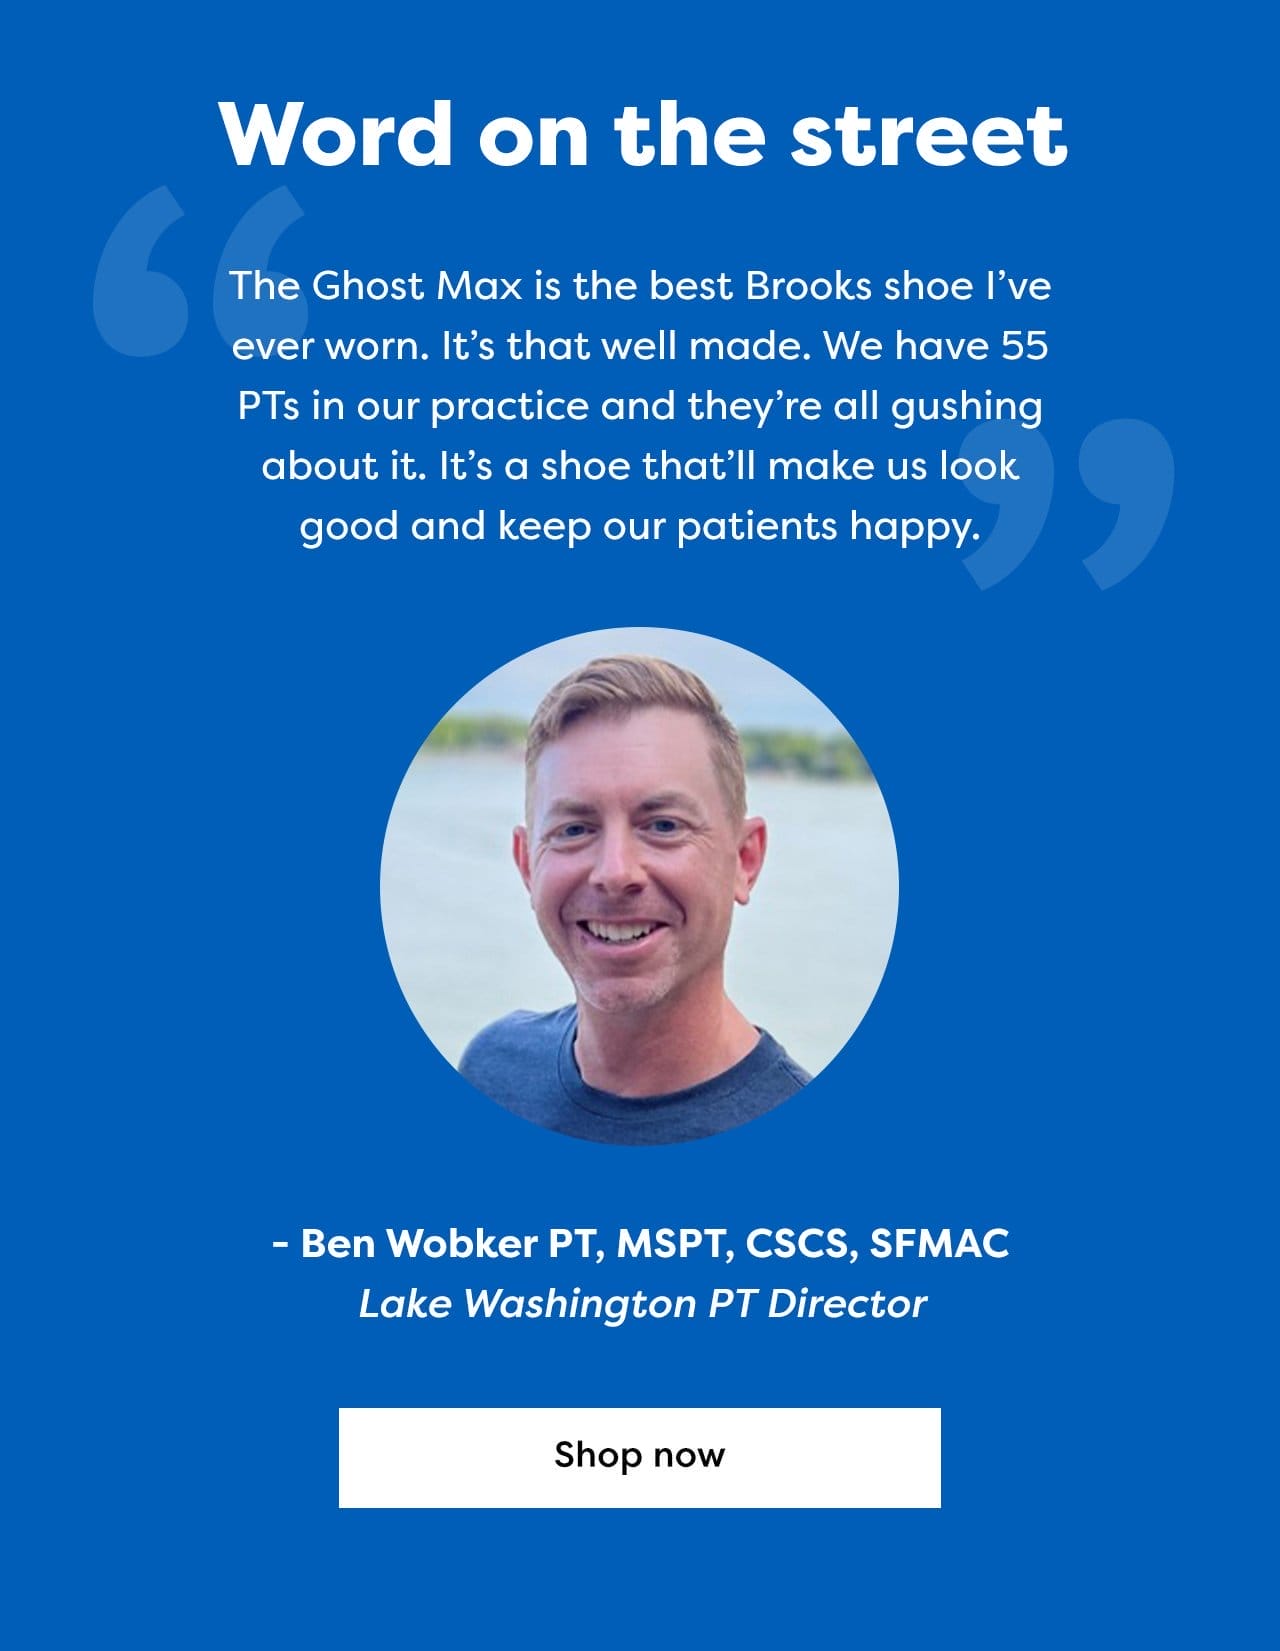 Word on the street - "The Ghost Max is the best Brooks shoe I've ever worn. It's that well made. We have 55 PTs in our practice and they're all gushing about it. It's a shoe that'll make us look good and keep our patients happy." - Ben Wobker PT, MSPT, CSCS, SFMAC - Lake Washington PT Director - Shop now